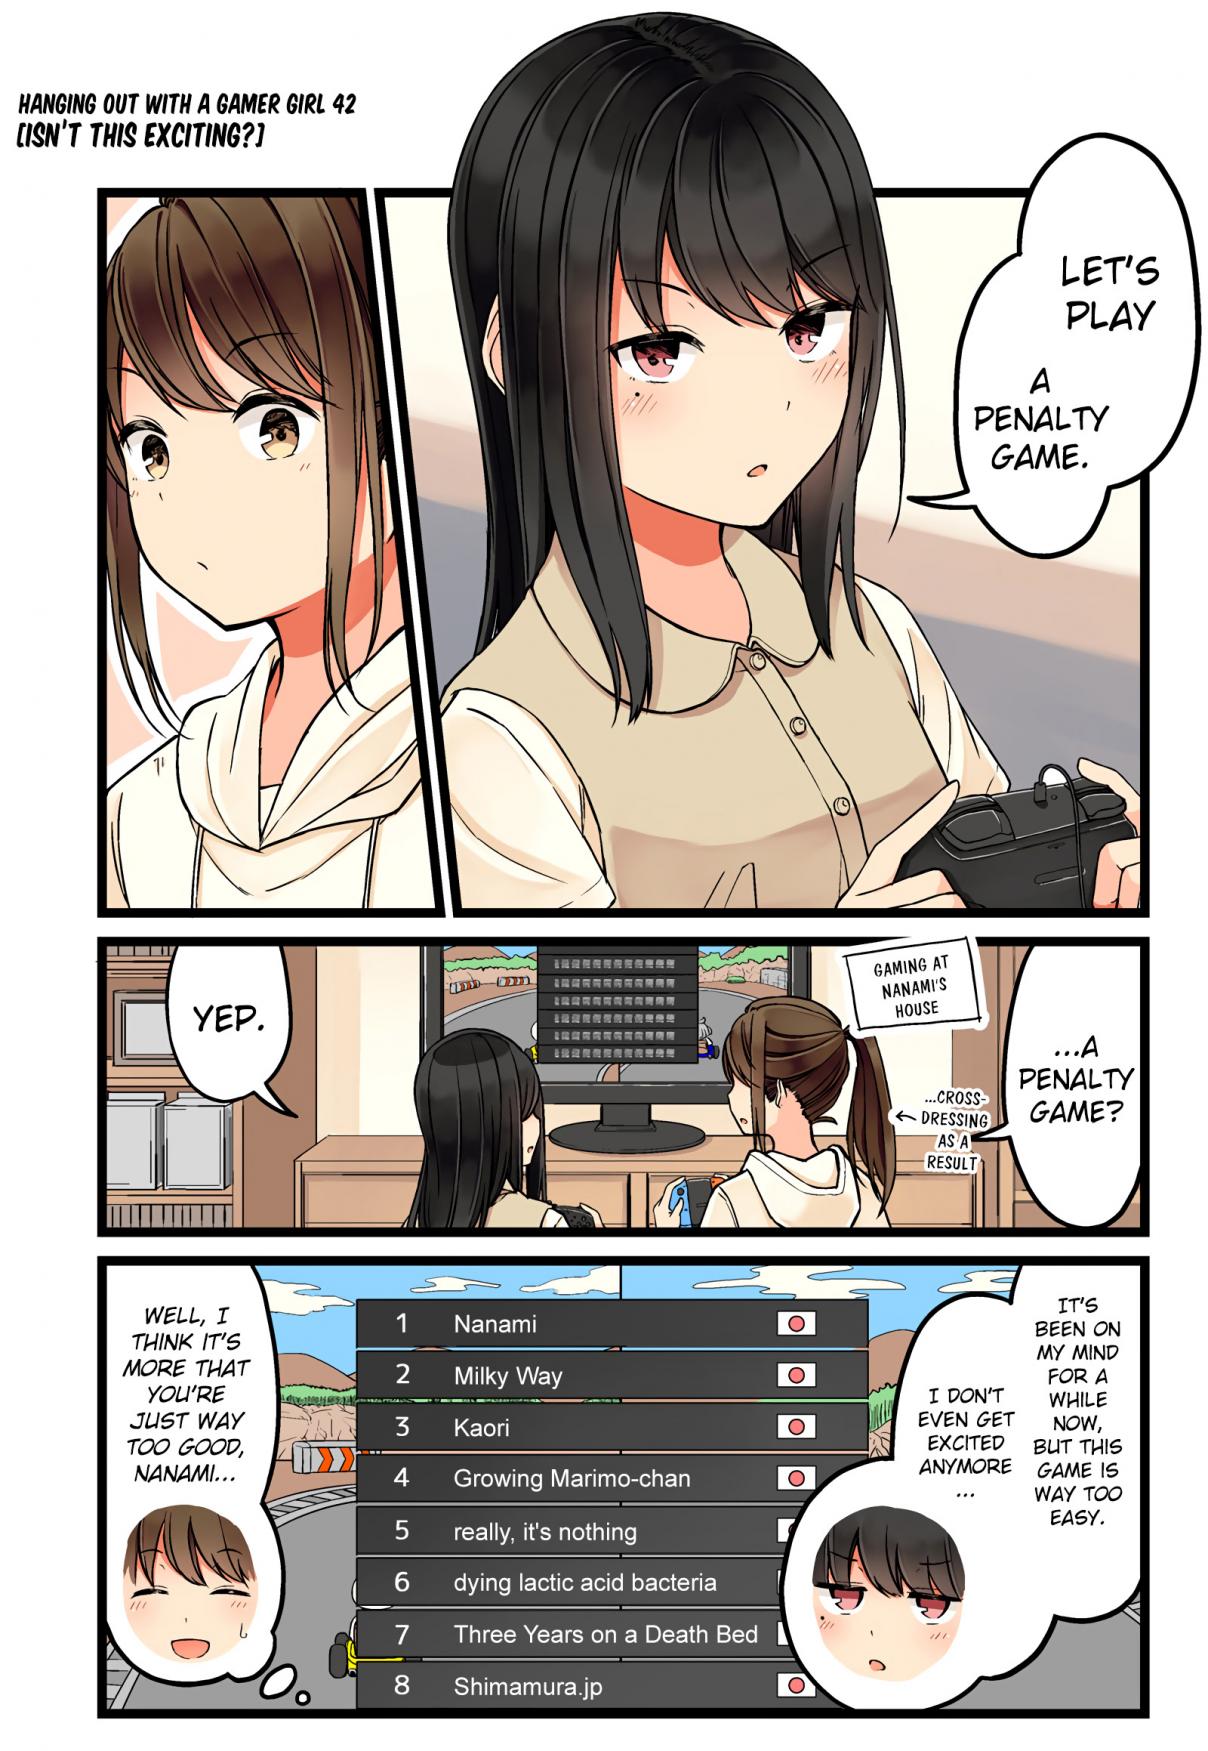 Hanging Out with a Gamer Girl Ch. 42 Isn’t this exciting?